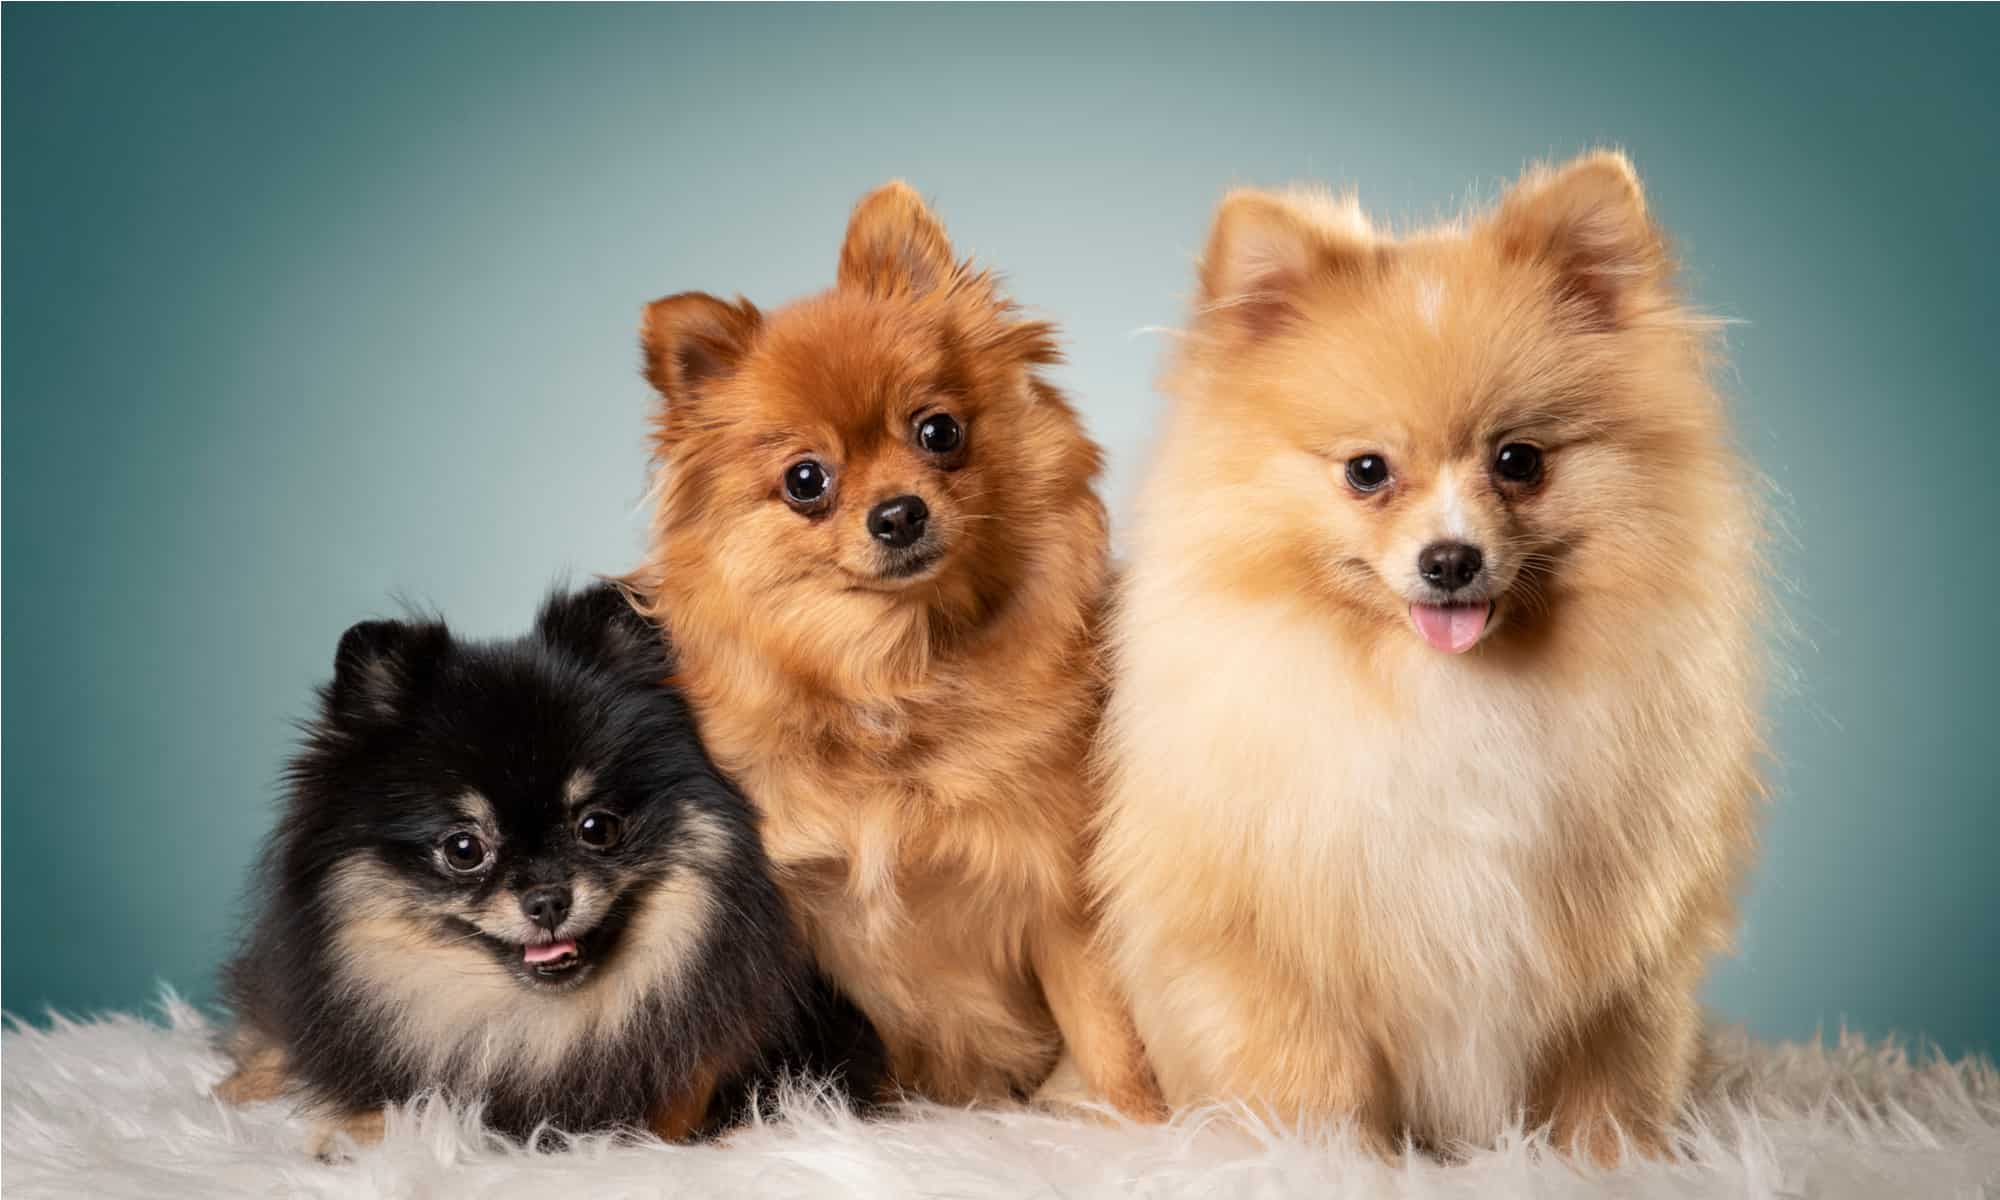 Three Pomeranians of different colors